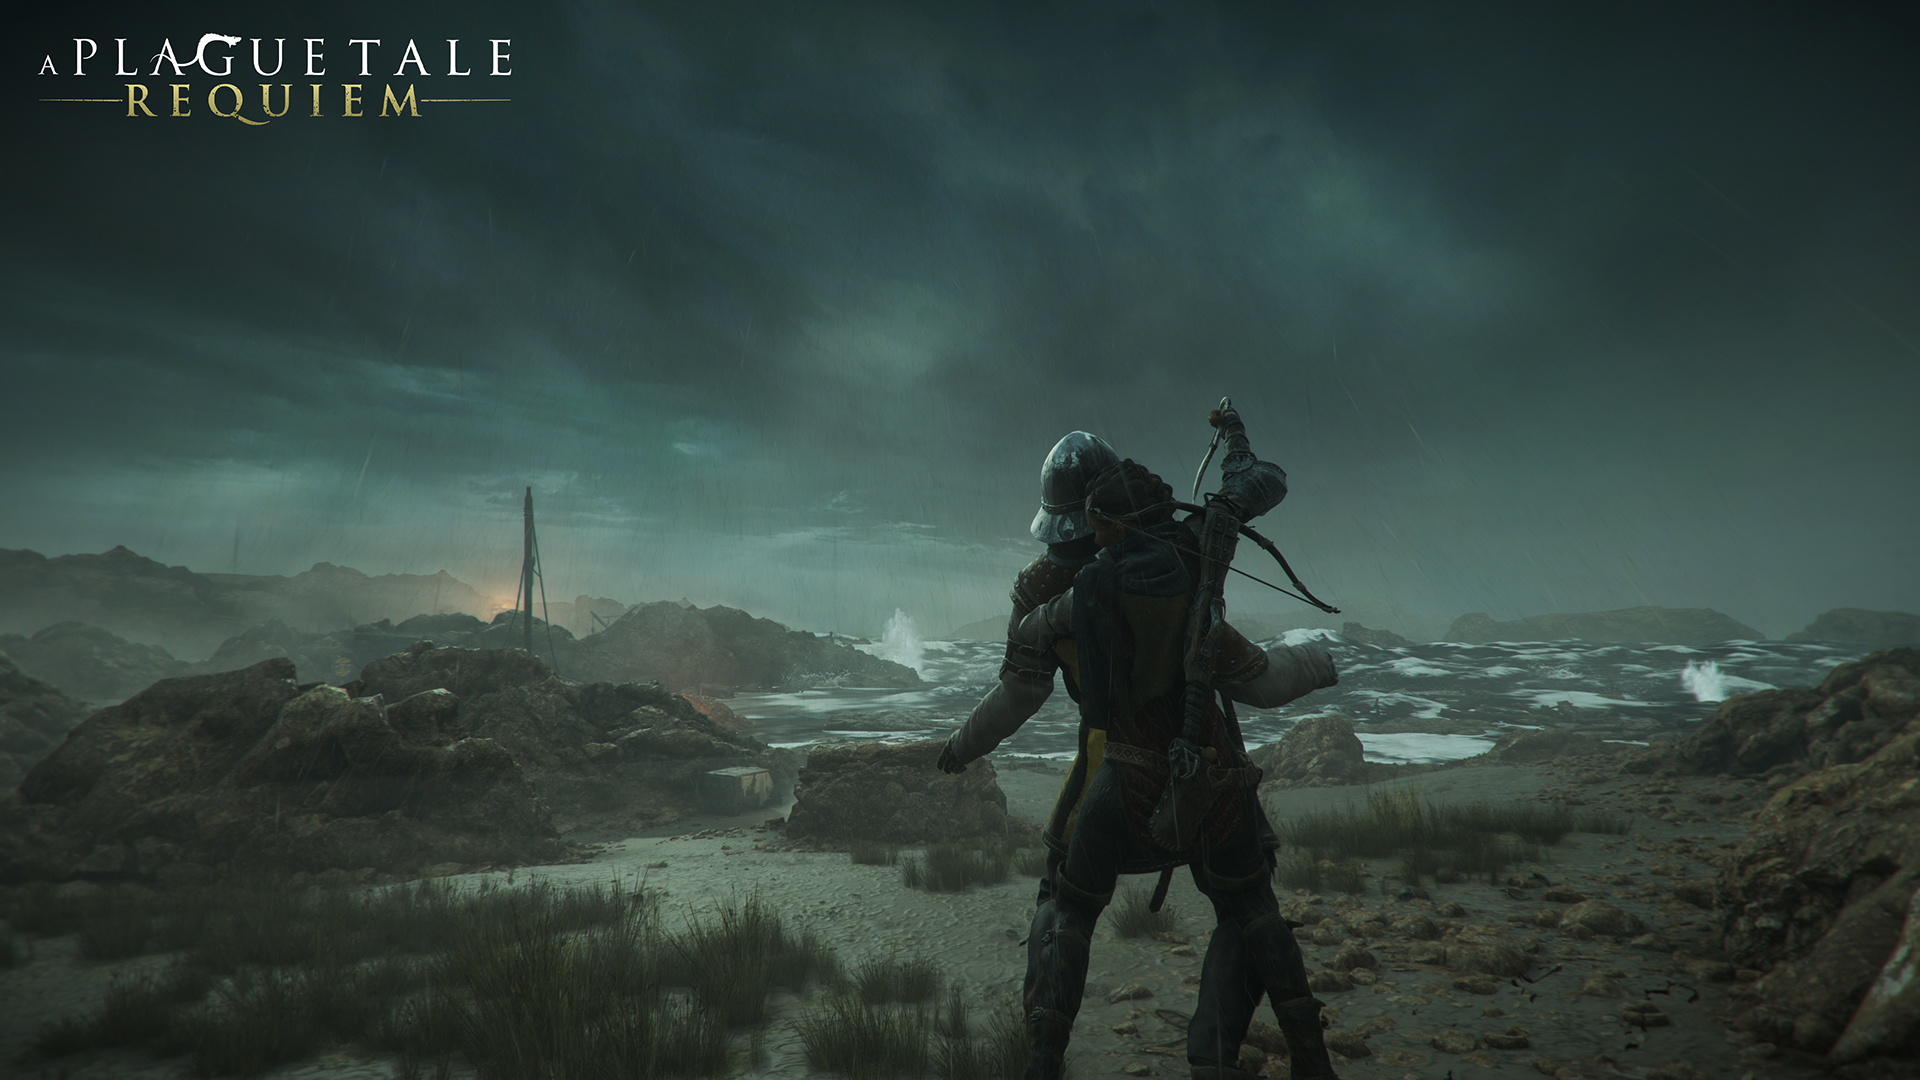 A Plague Tale: Requiem starts on October 18. Watch the gameplay video